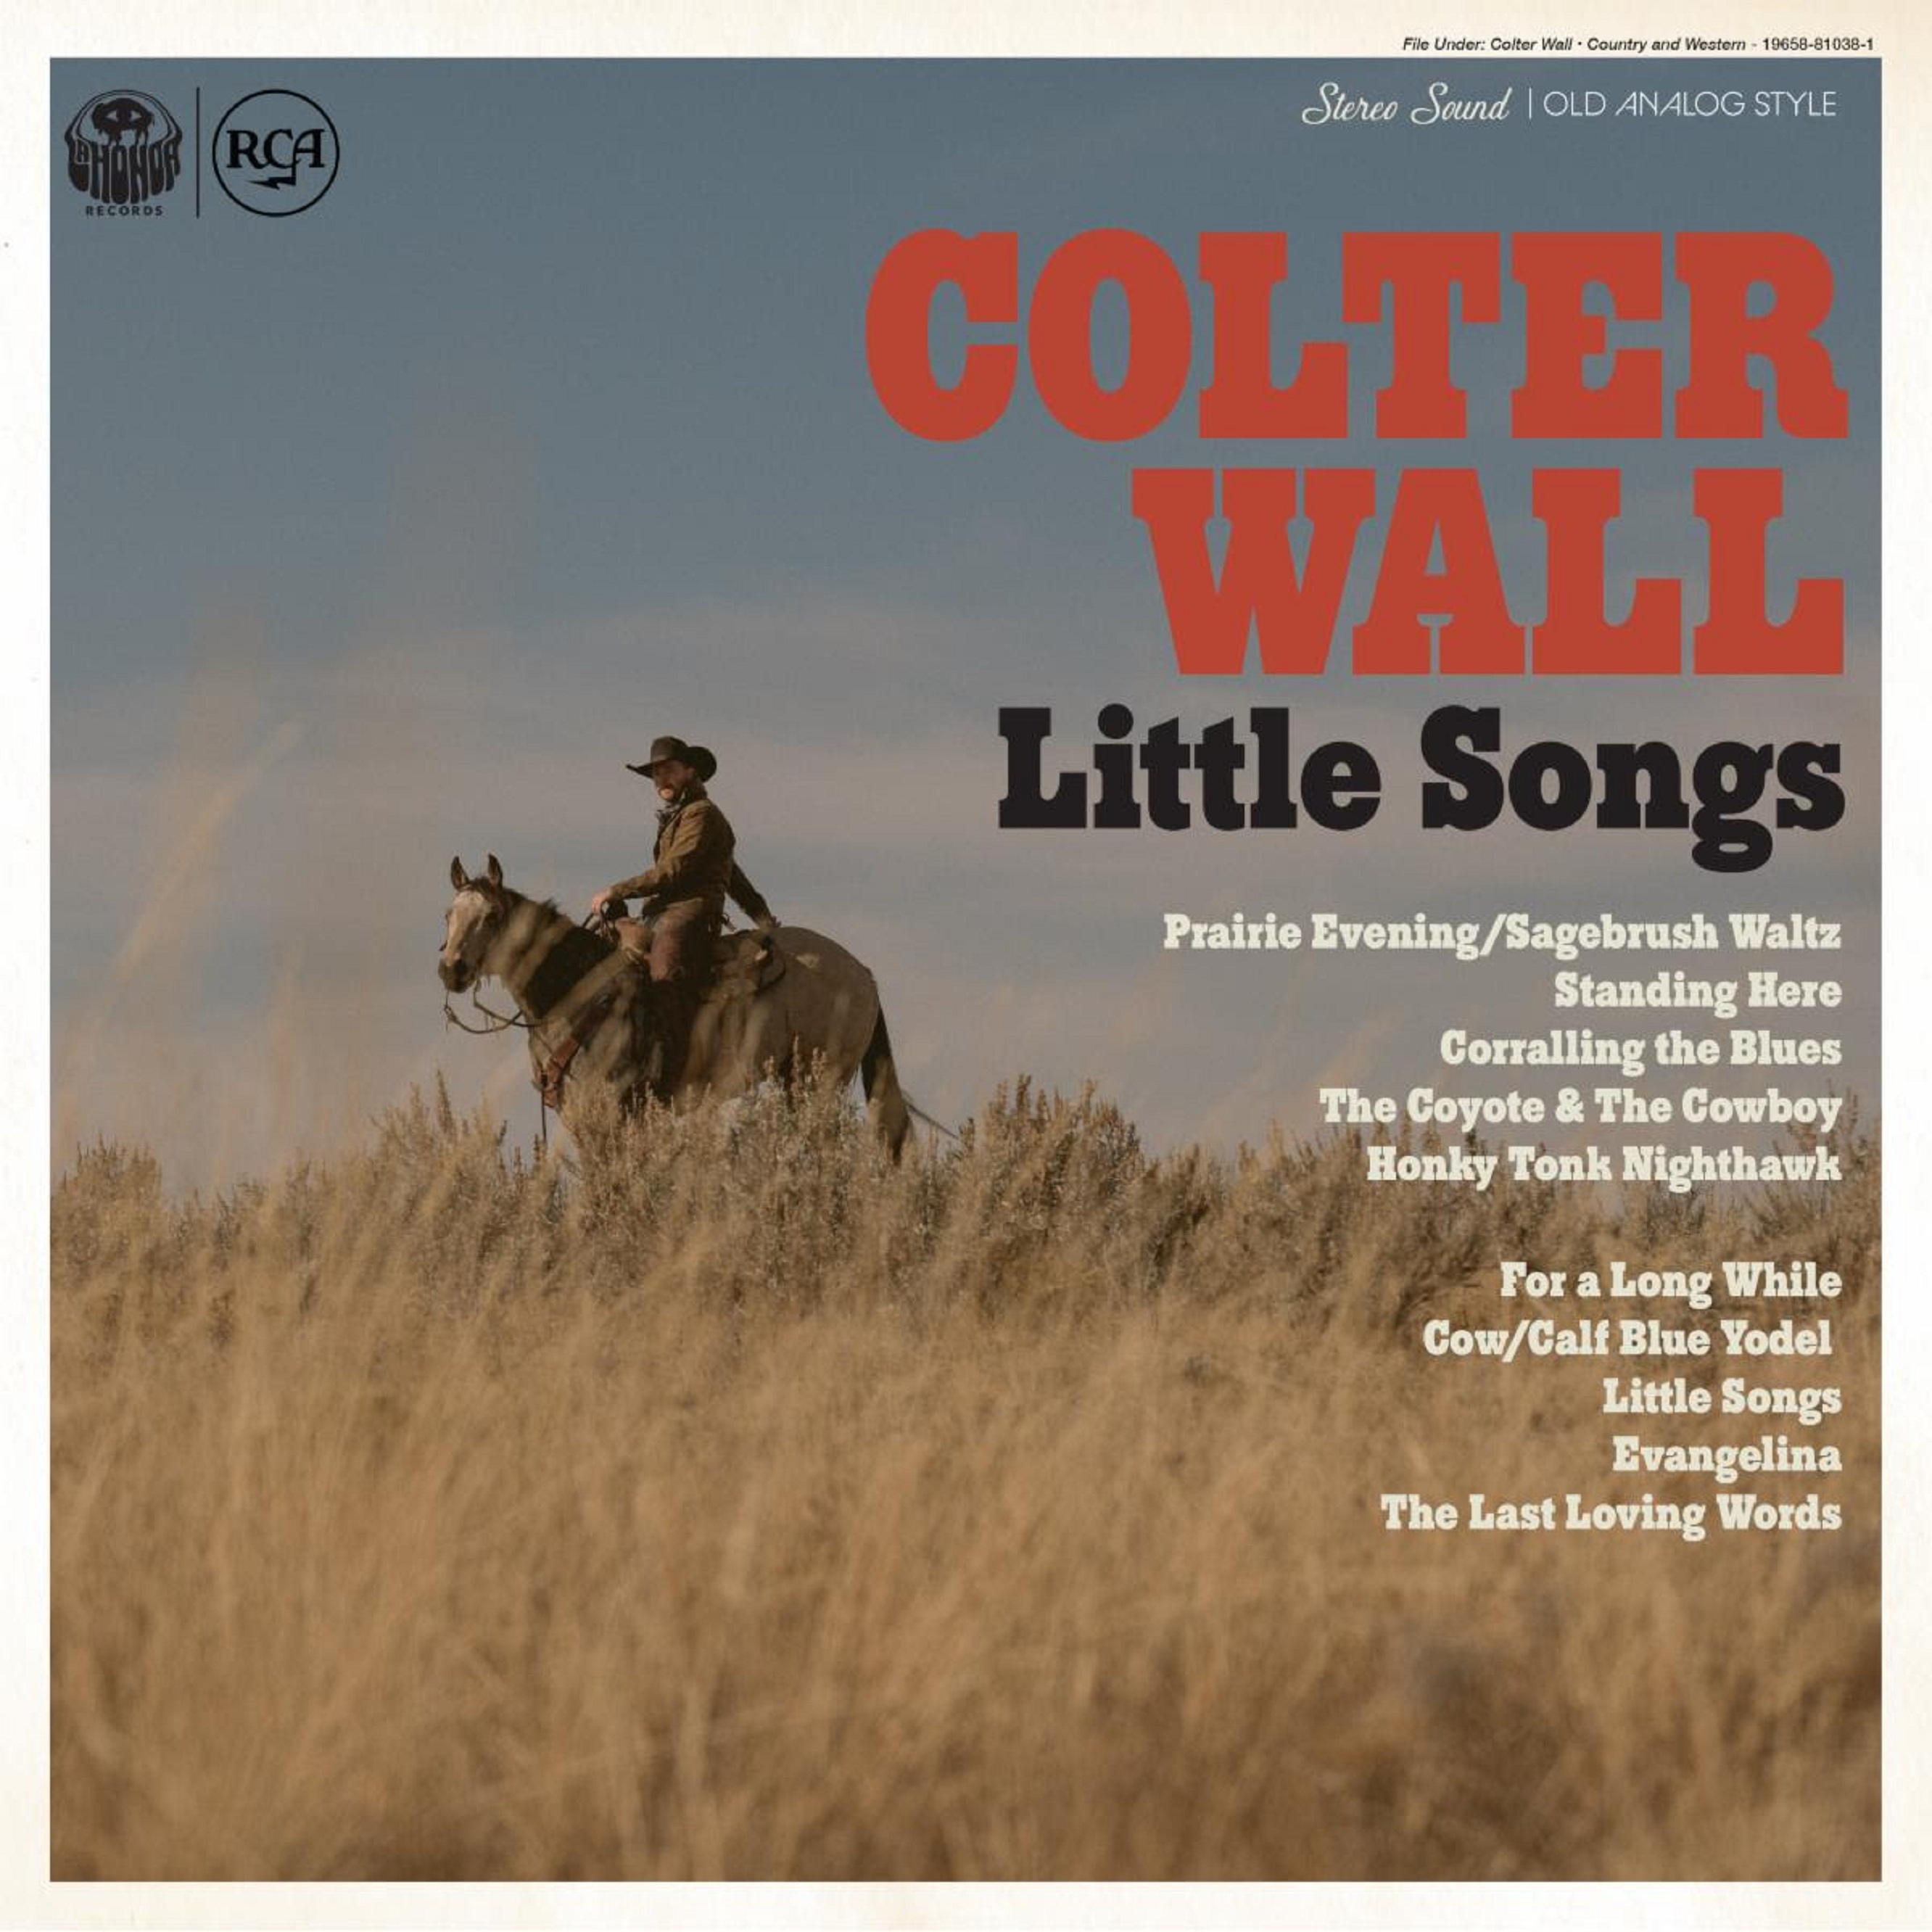 Colter Wall Announces New Album 'Little Songs' With The Release Of New Single “Evangelina”